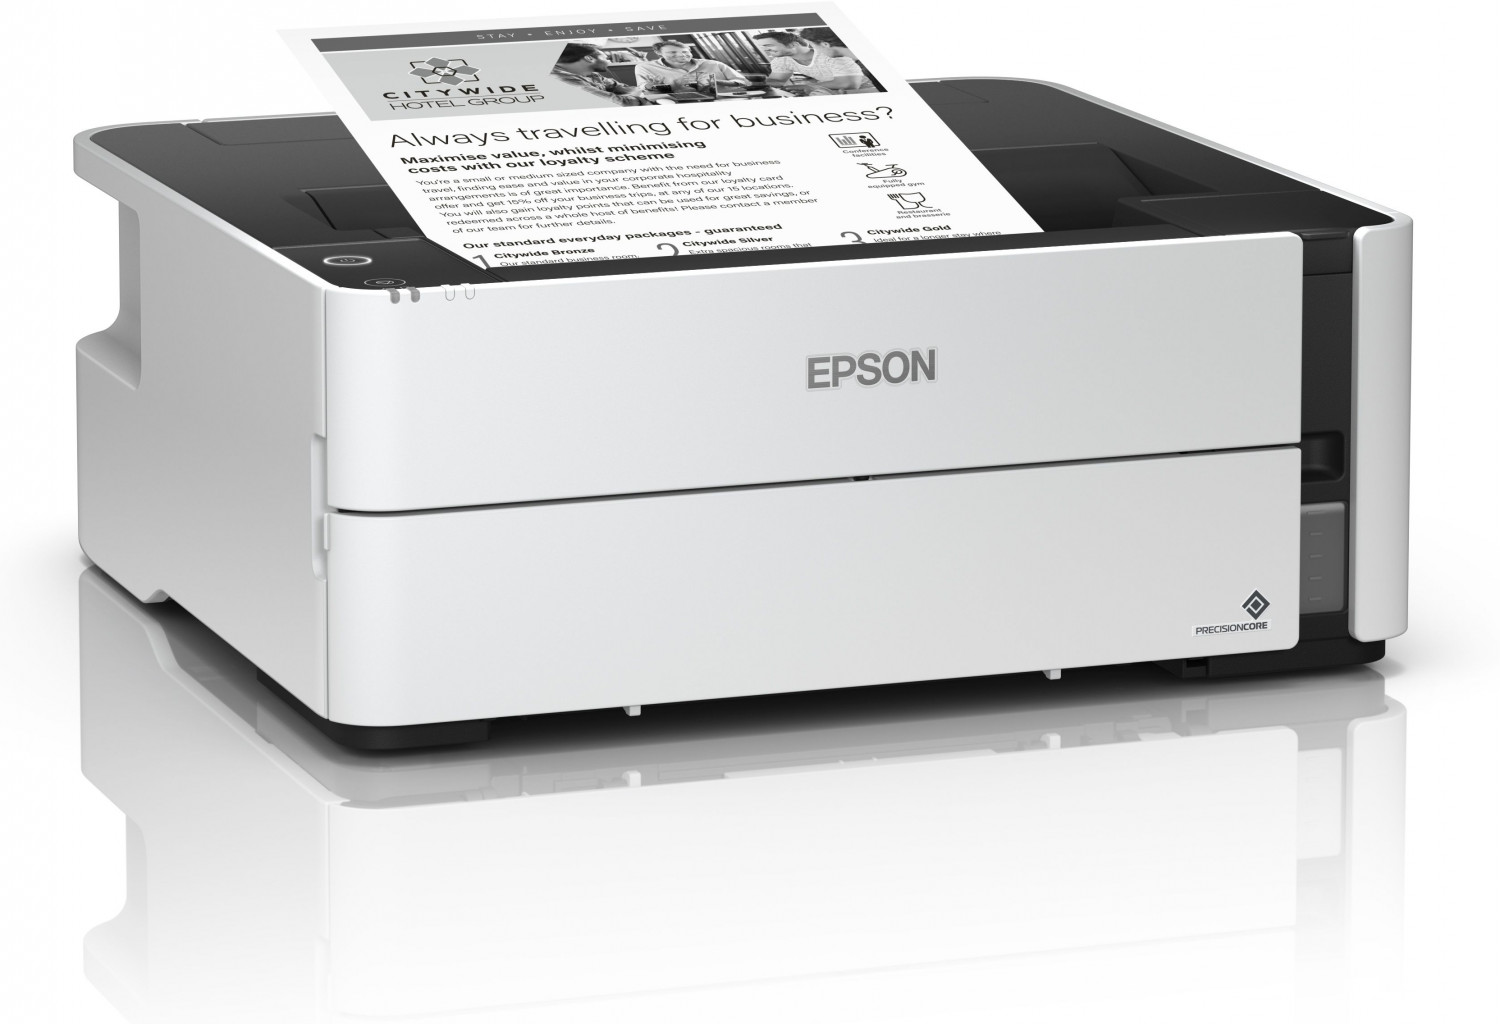 Step-by-step Driver Epson Printer ET-M1170 Kali Linux Installation - Featured